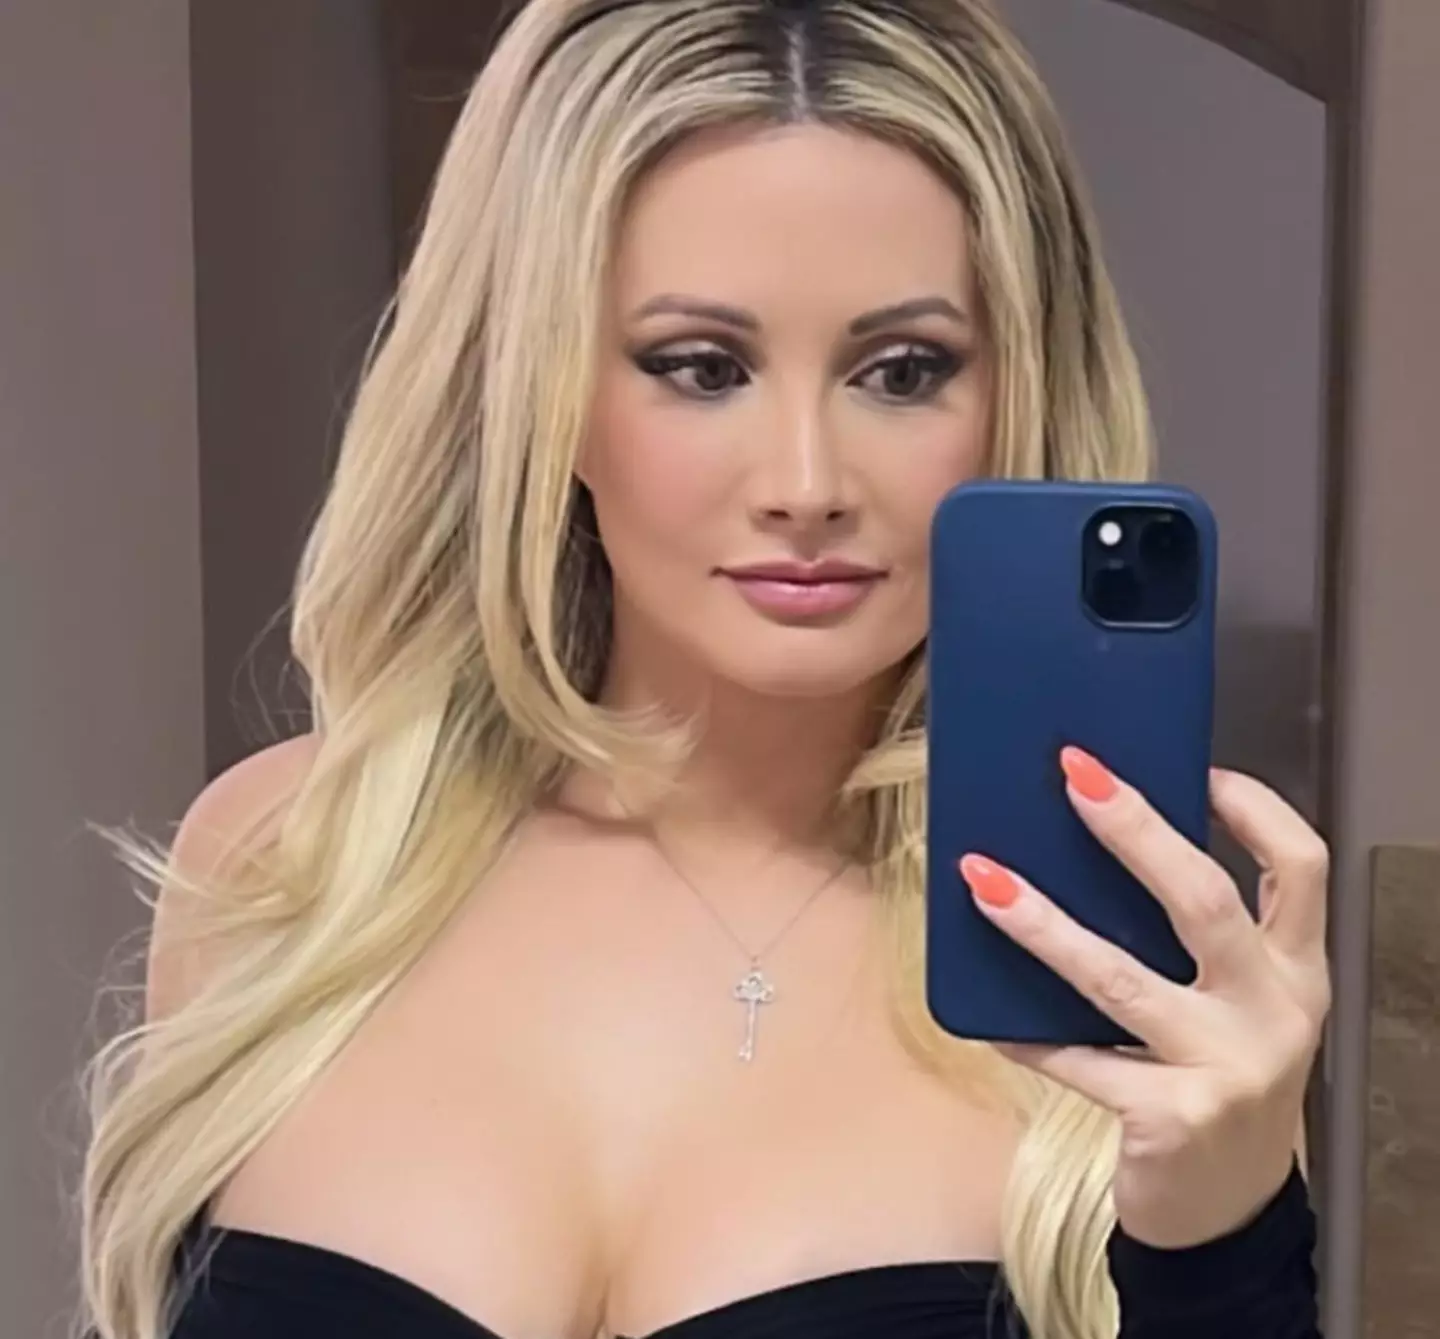 Holly Madison made numerous claims in the documentary.